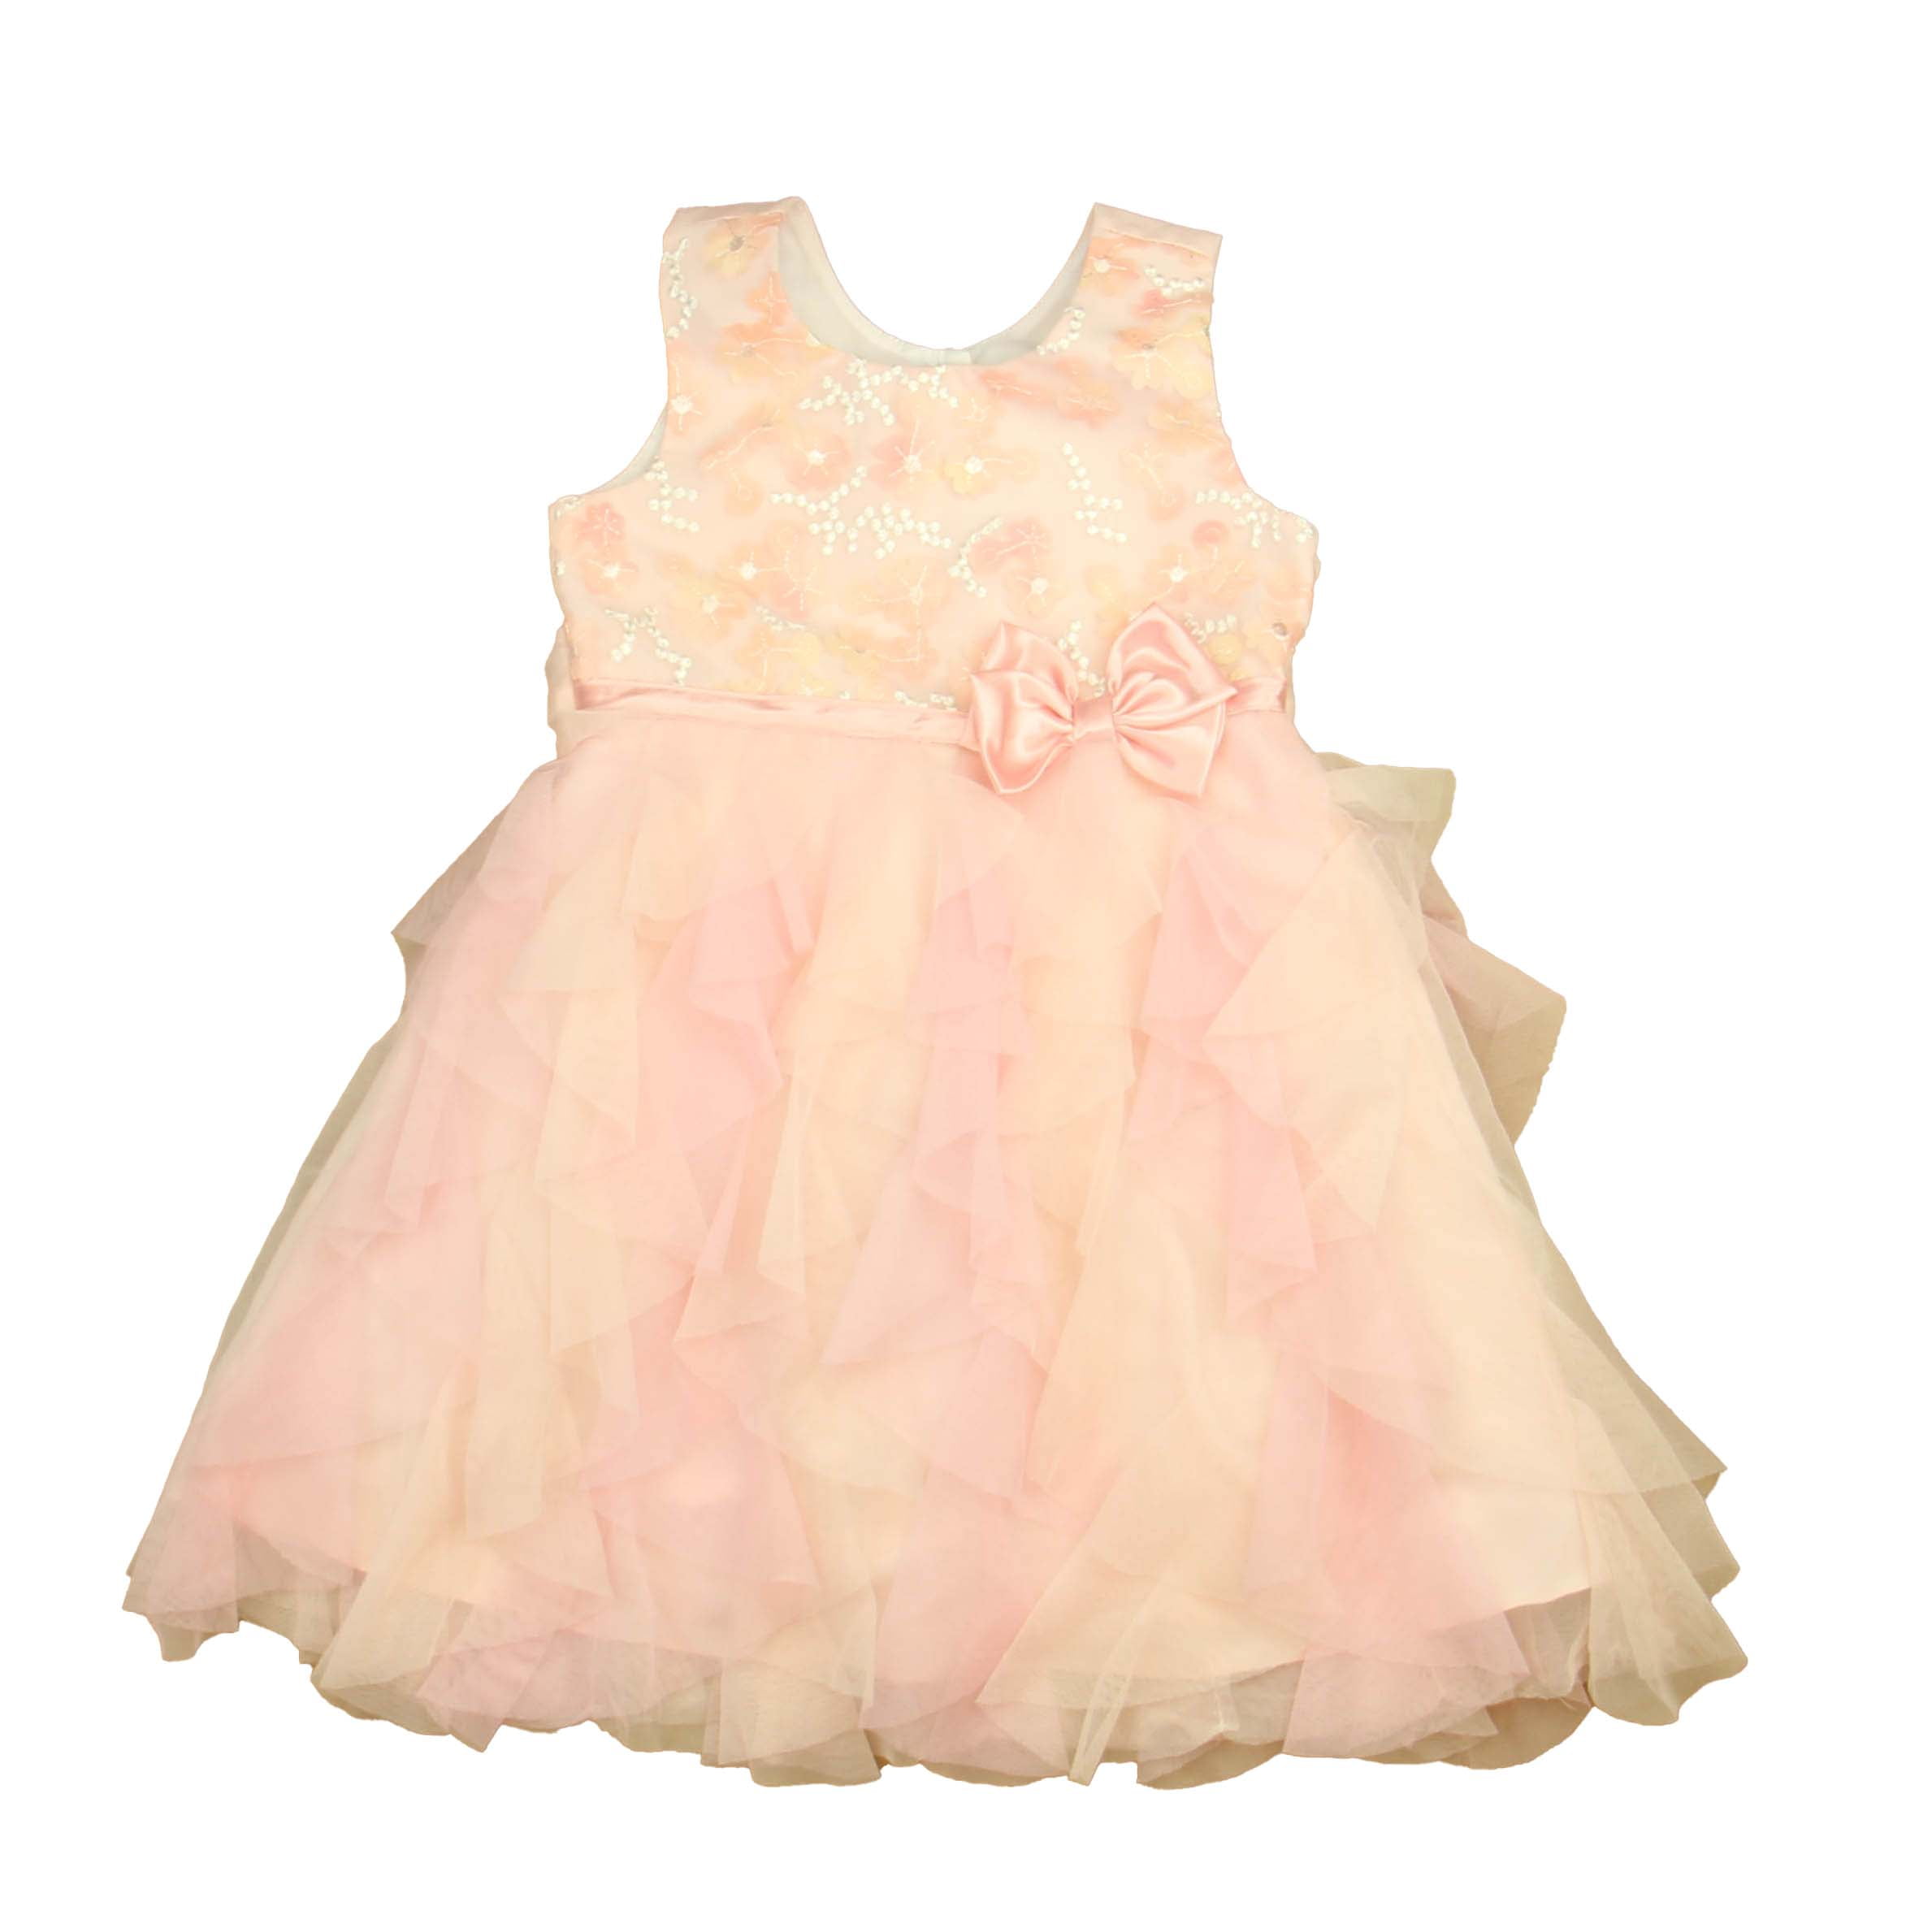 Dress size: 4T - The Swoondle Society